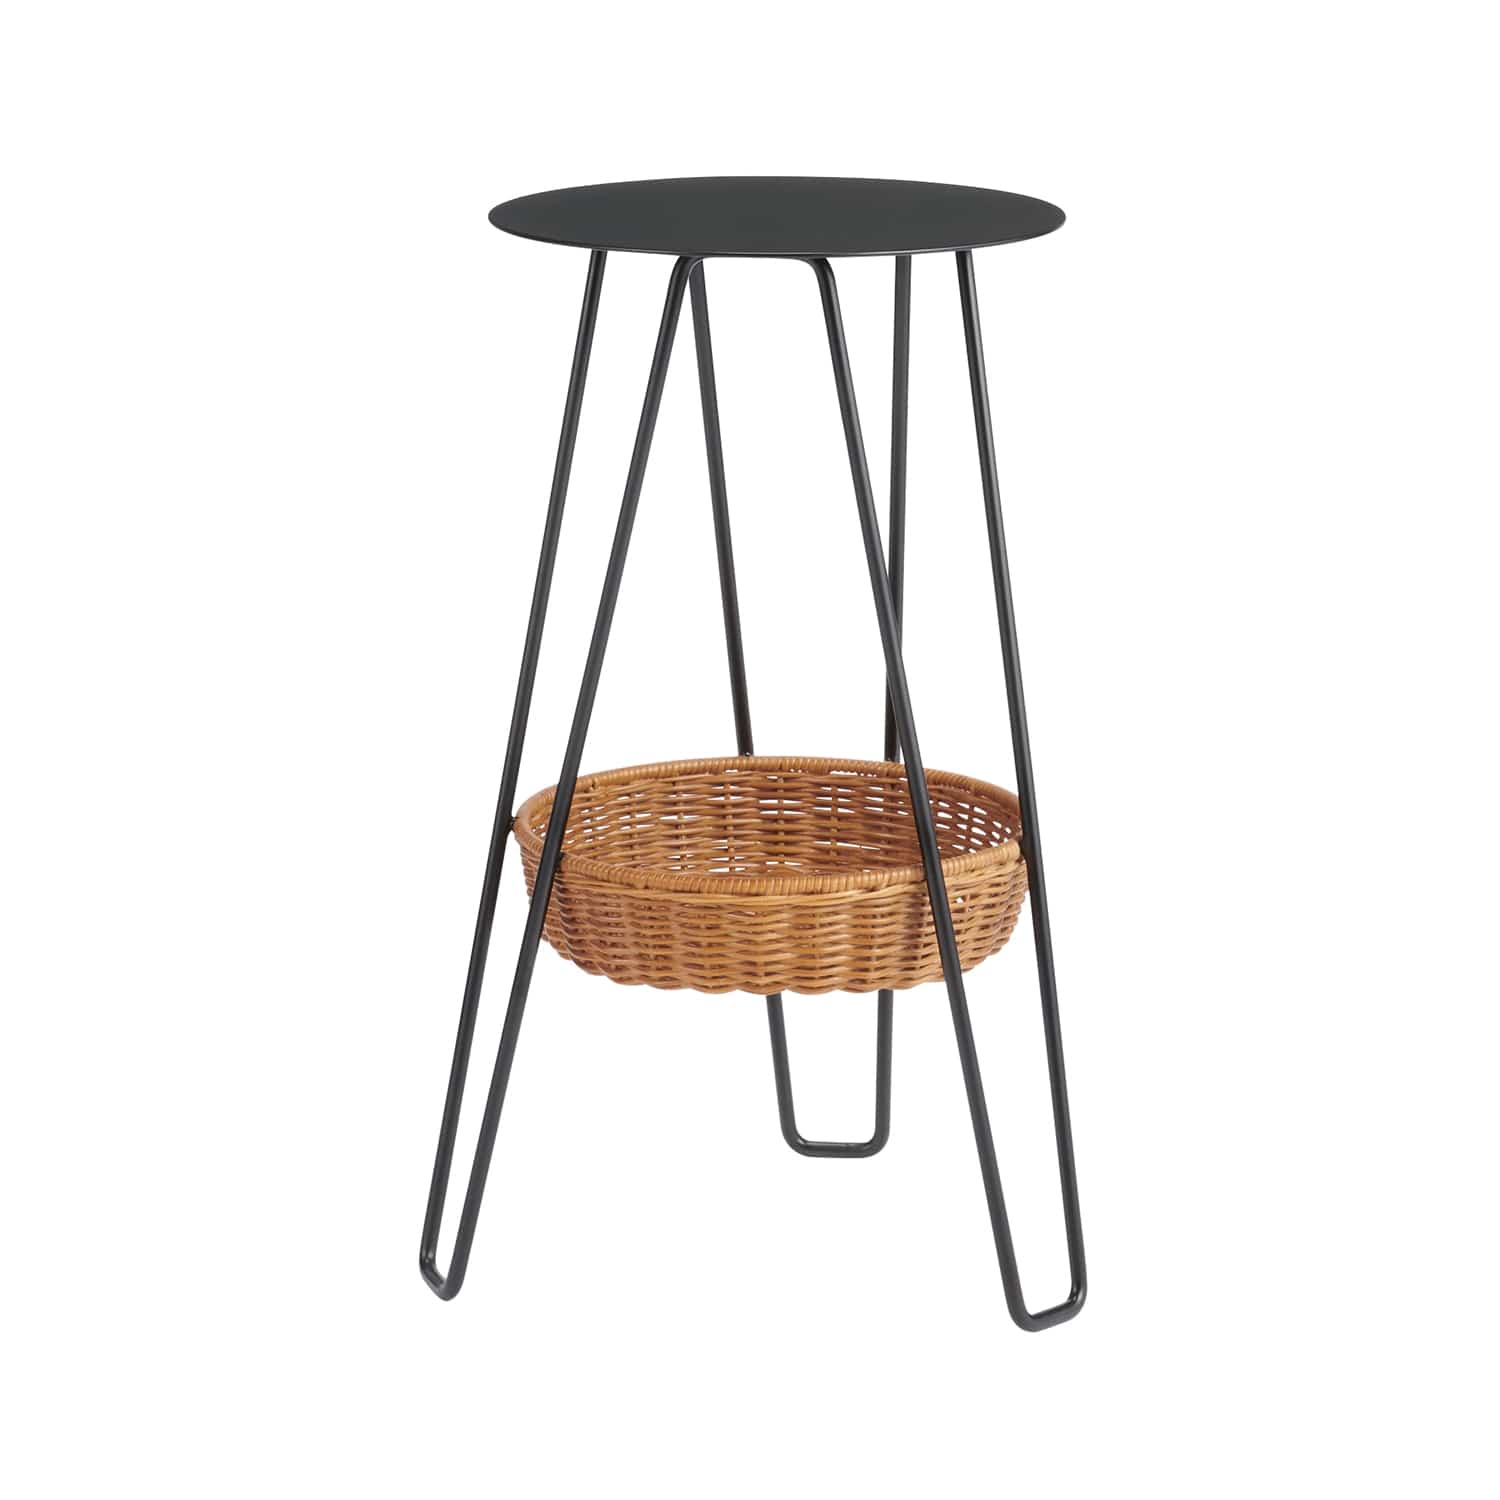 ○IDEE ONLINE期間限定 WALLABY SIDE TABLE Black｜サイドテーブル 